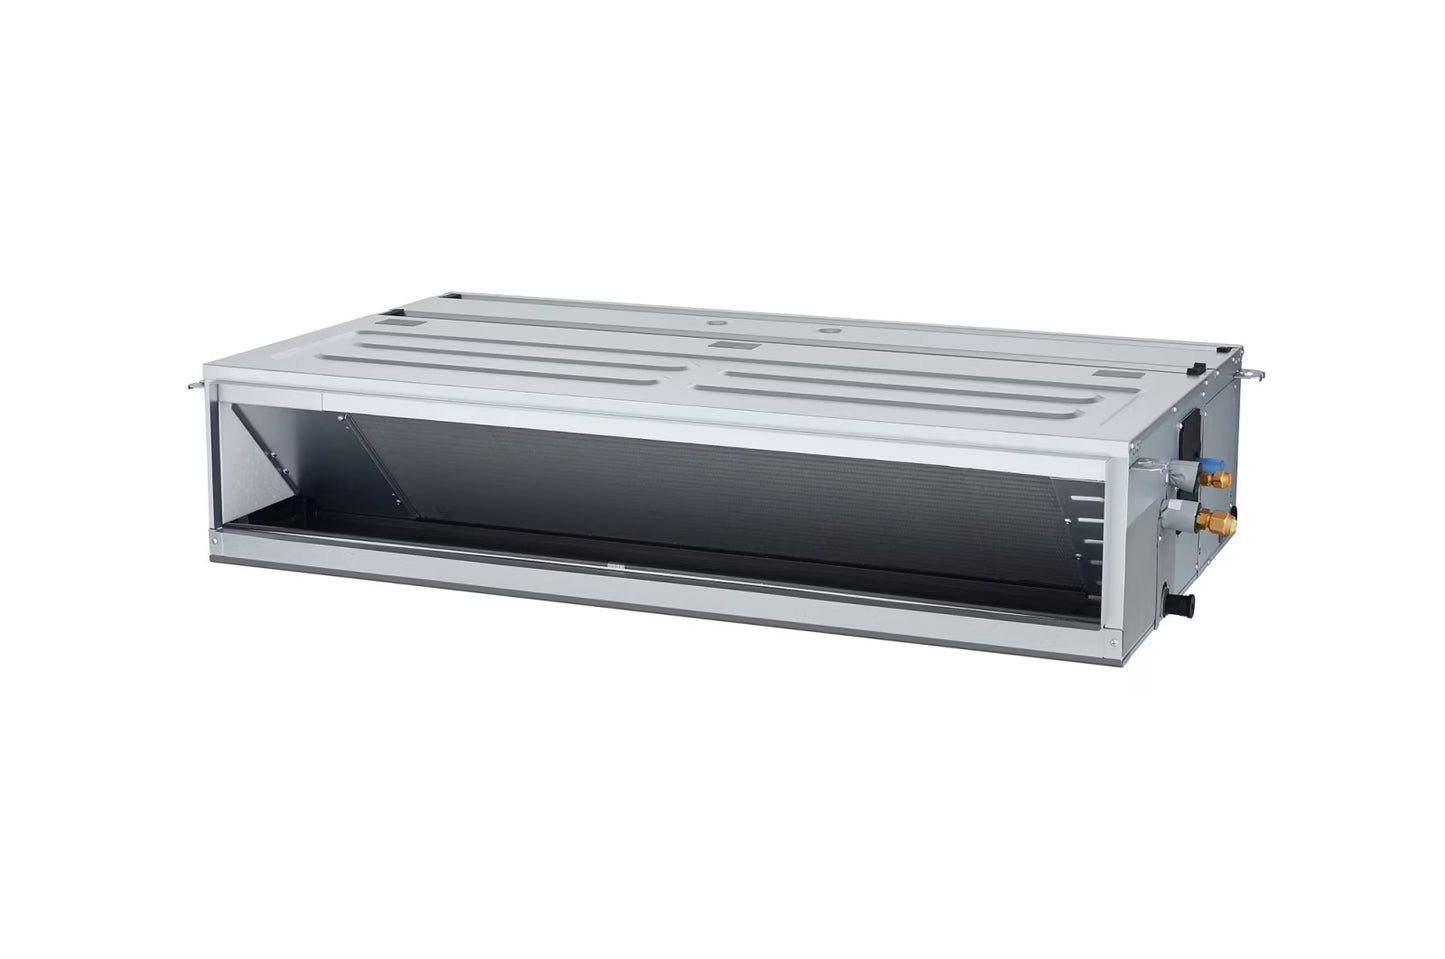 LG Ceiling Concealed Duct INV Unit 8.2KW with Mid Static and E.S.P. Control for Multiple Rooms - ARNU28GM2A4